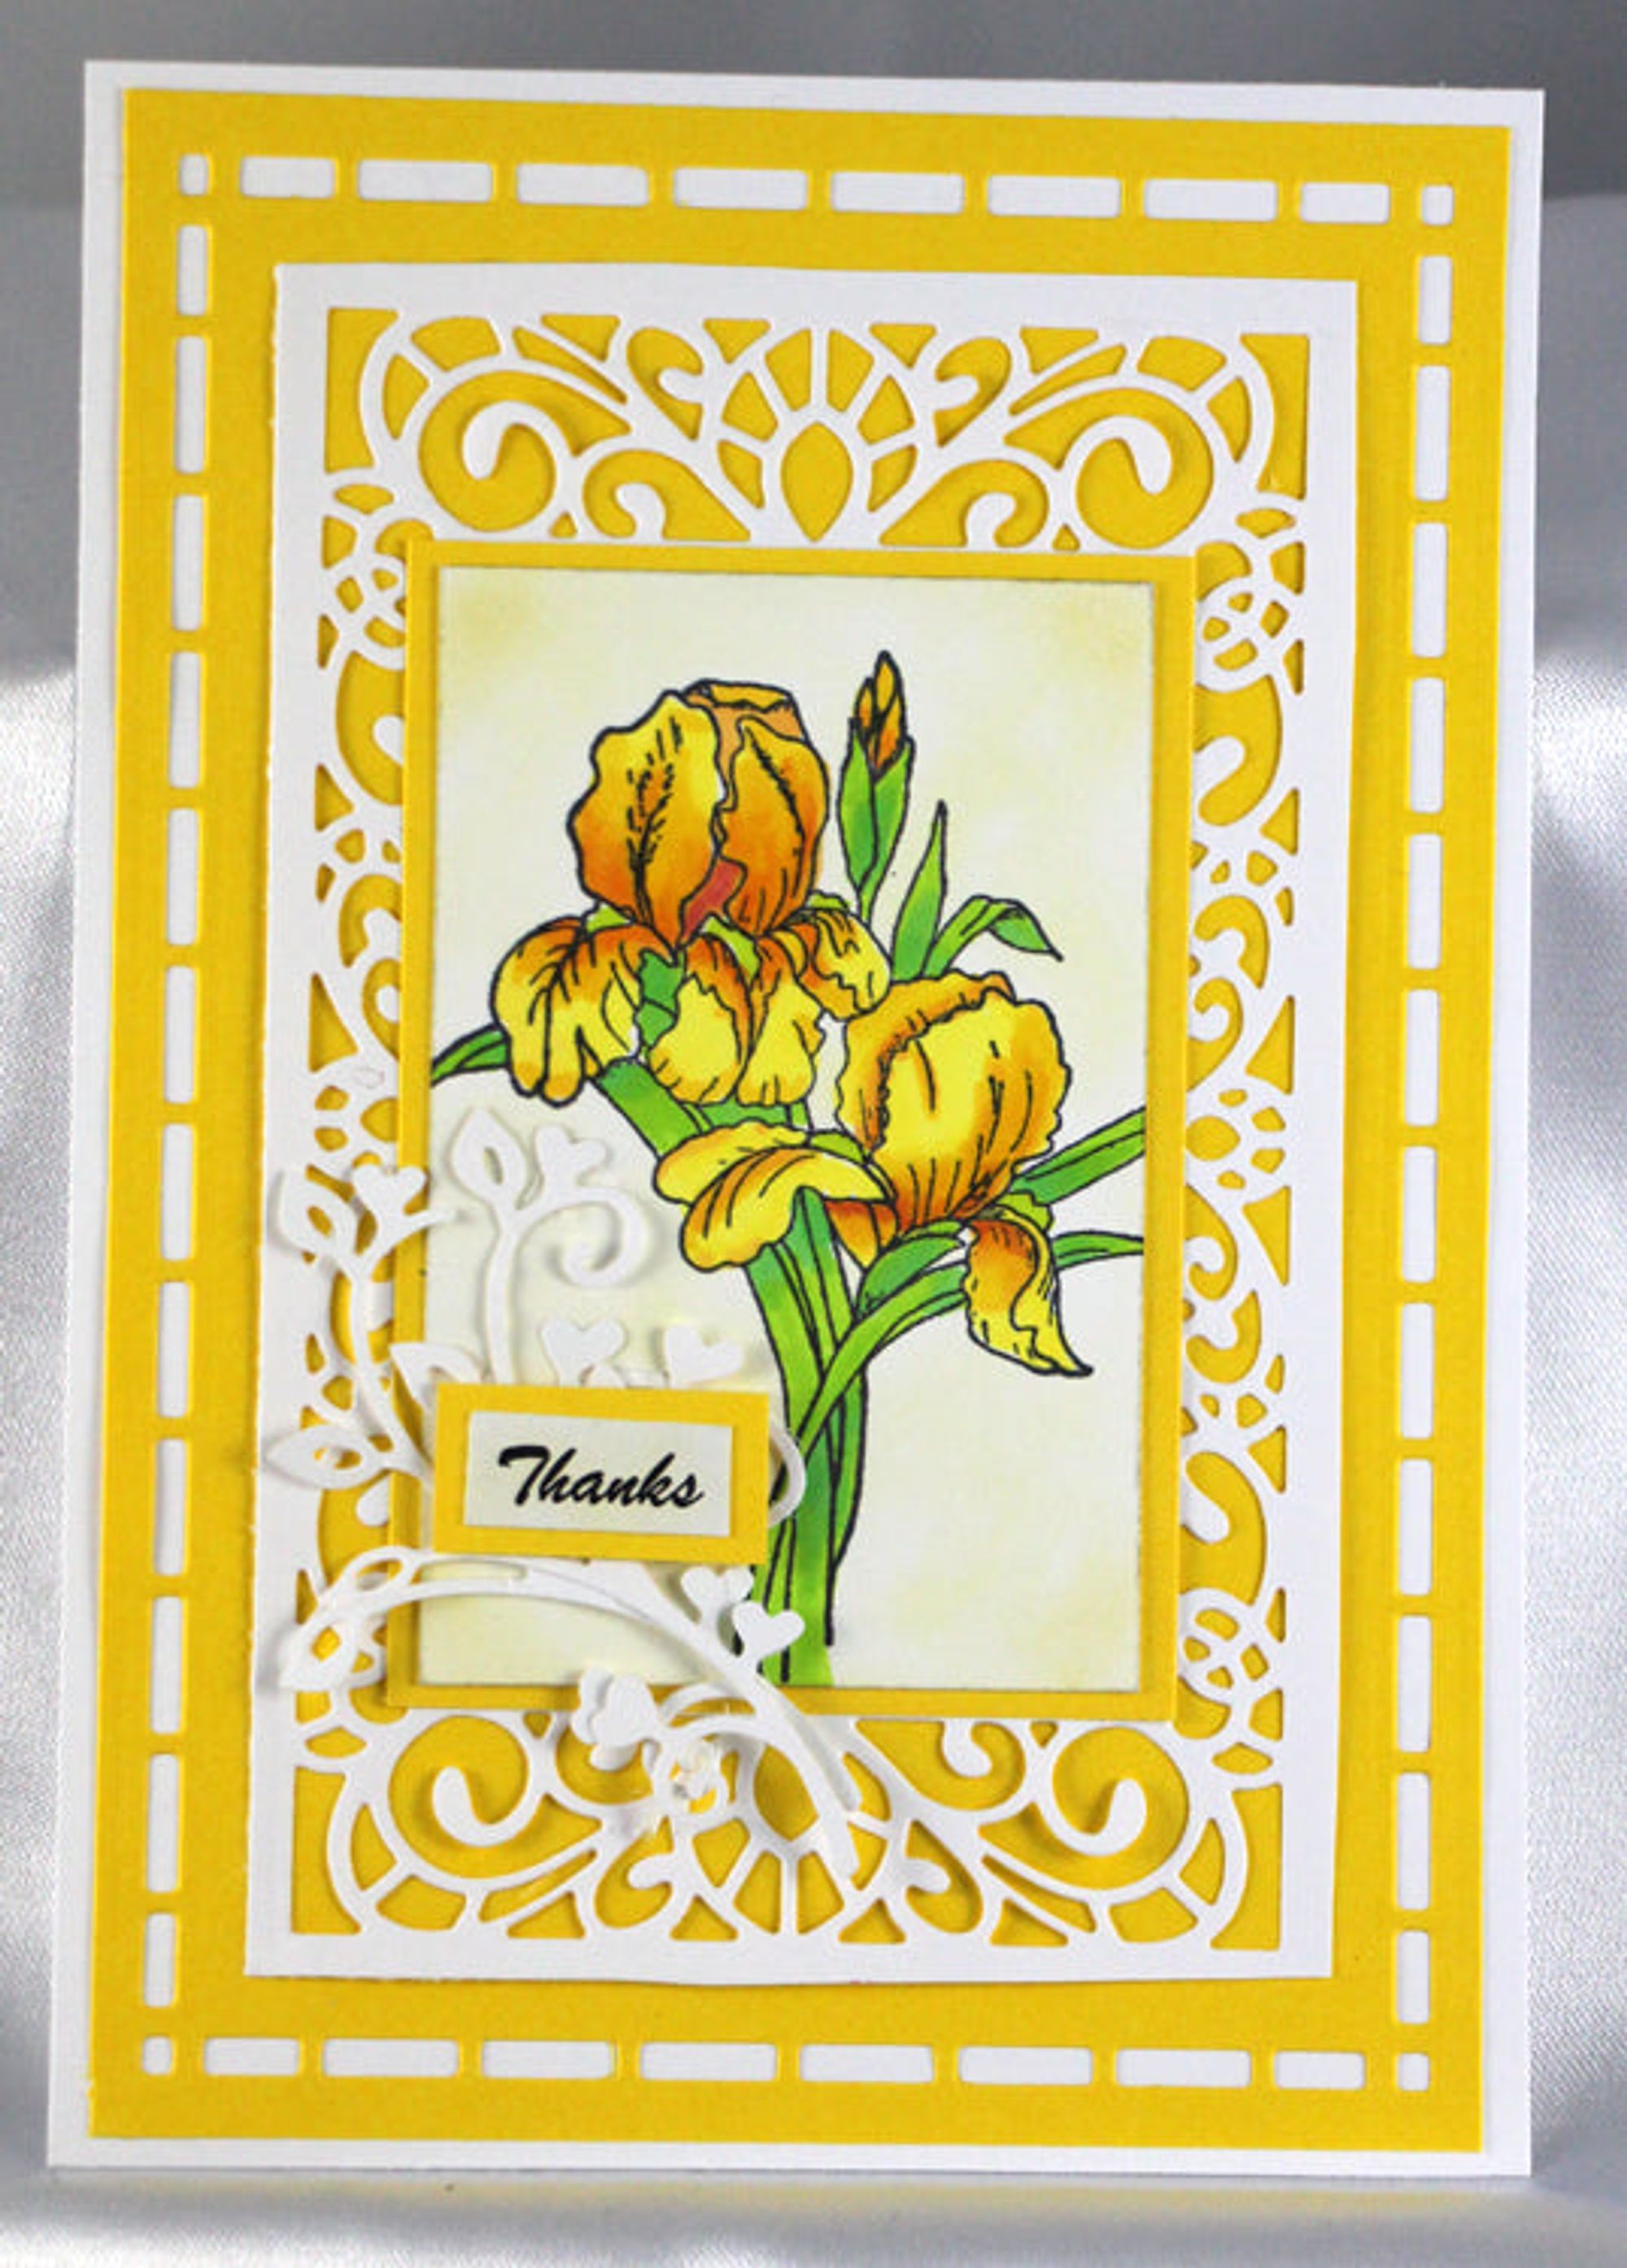 Frog's Whiskers Stamps - Iris